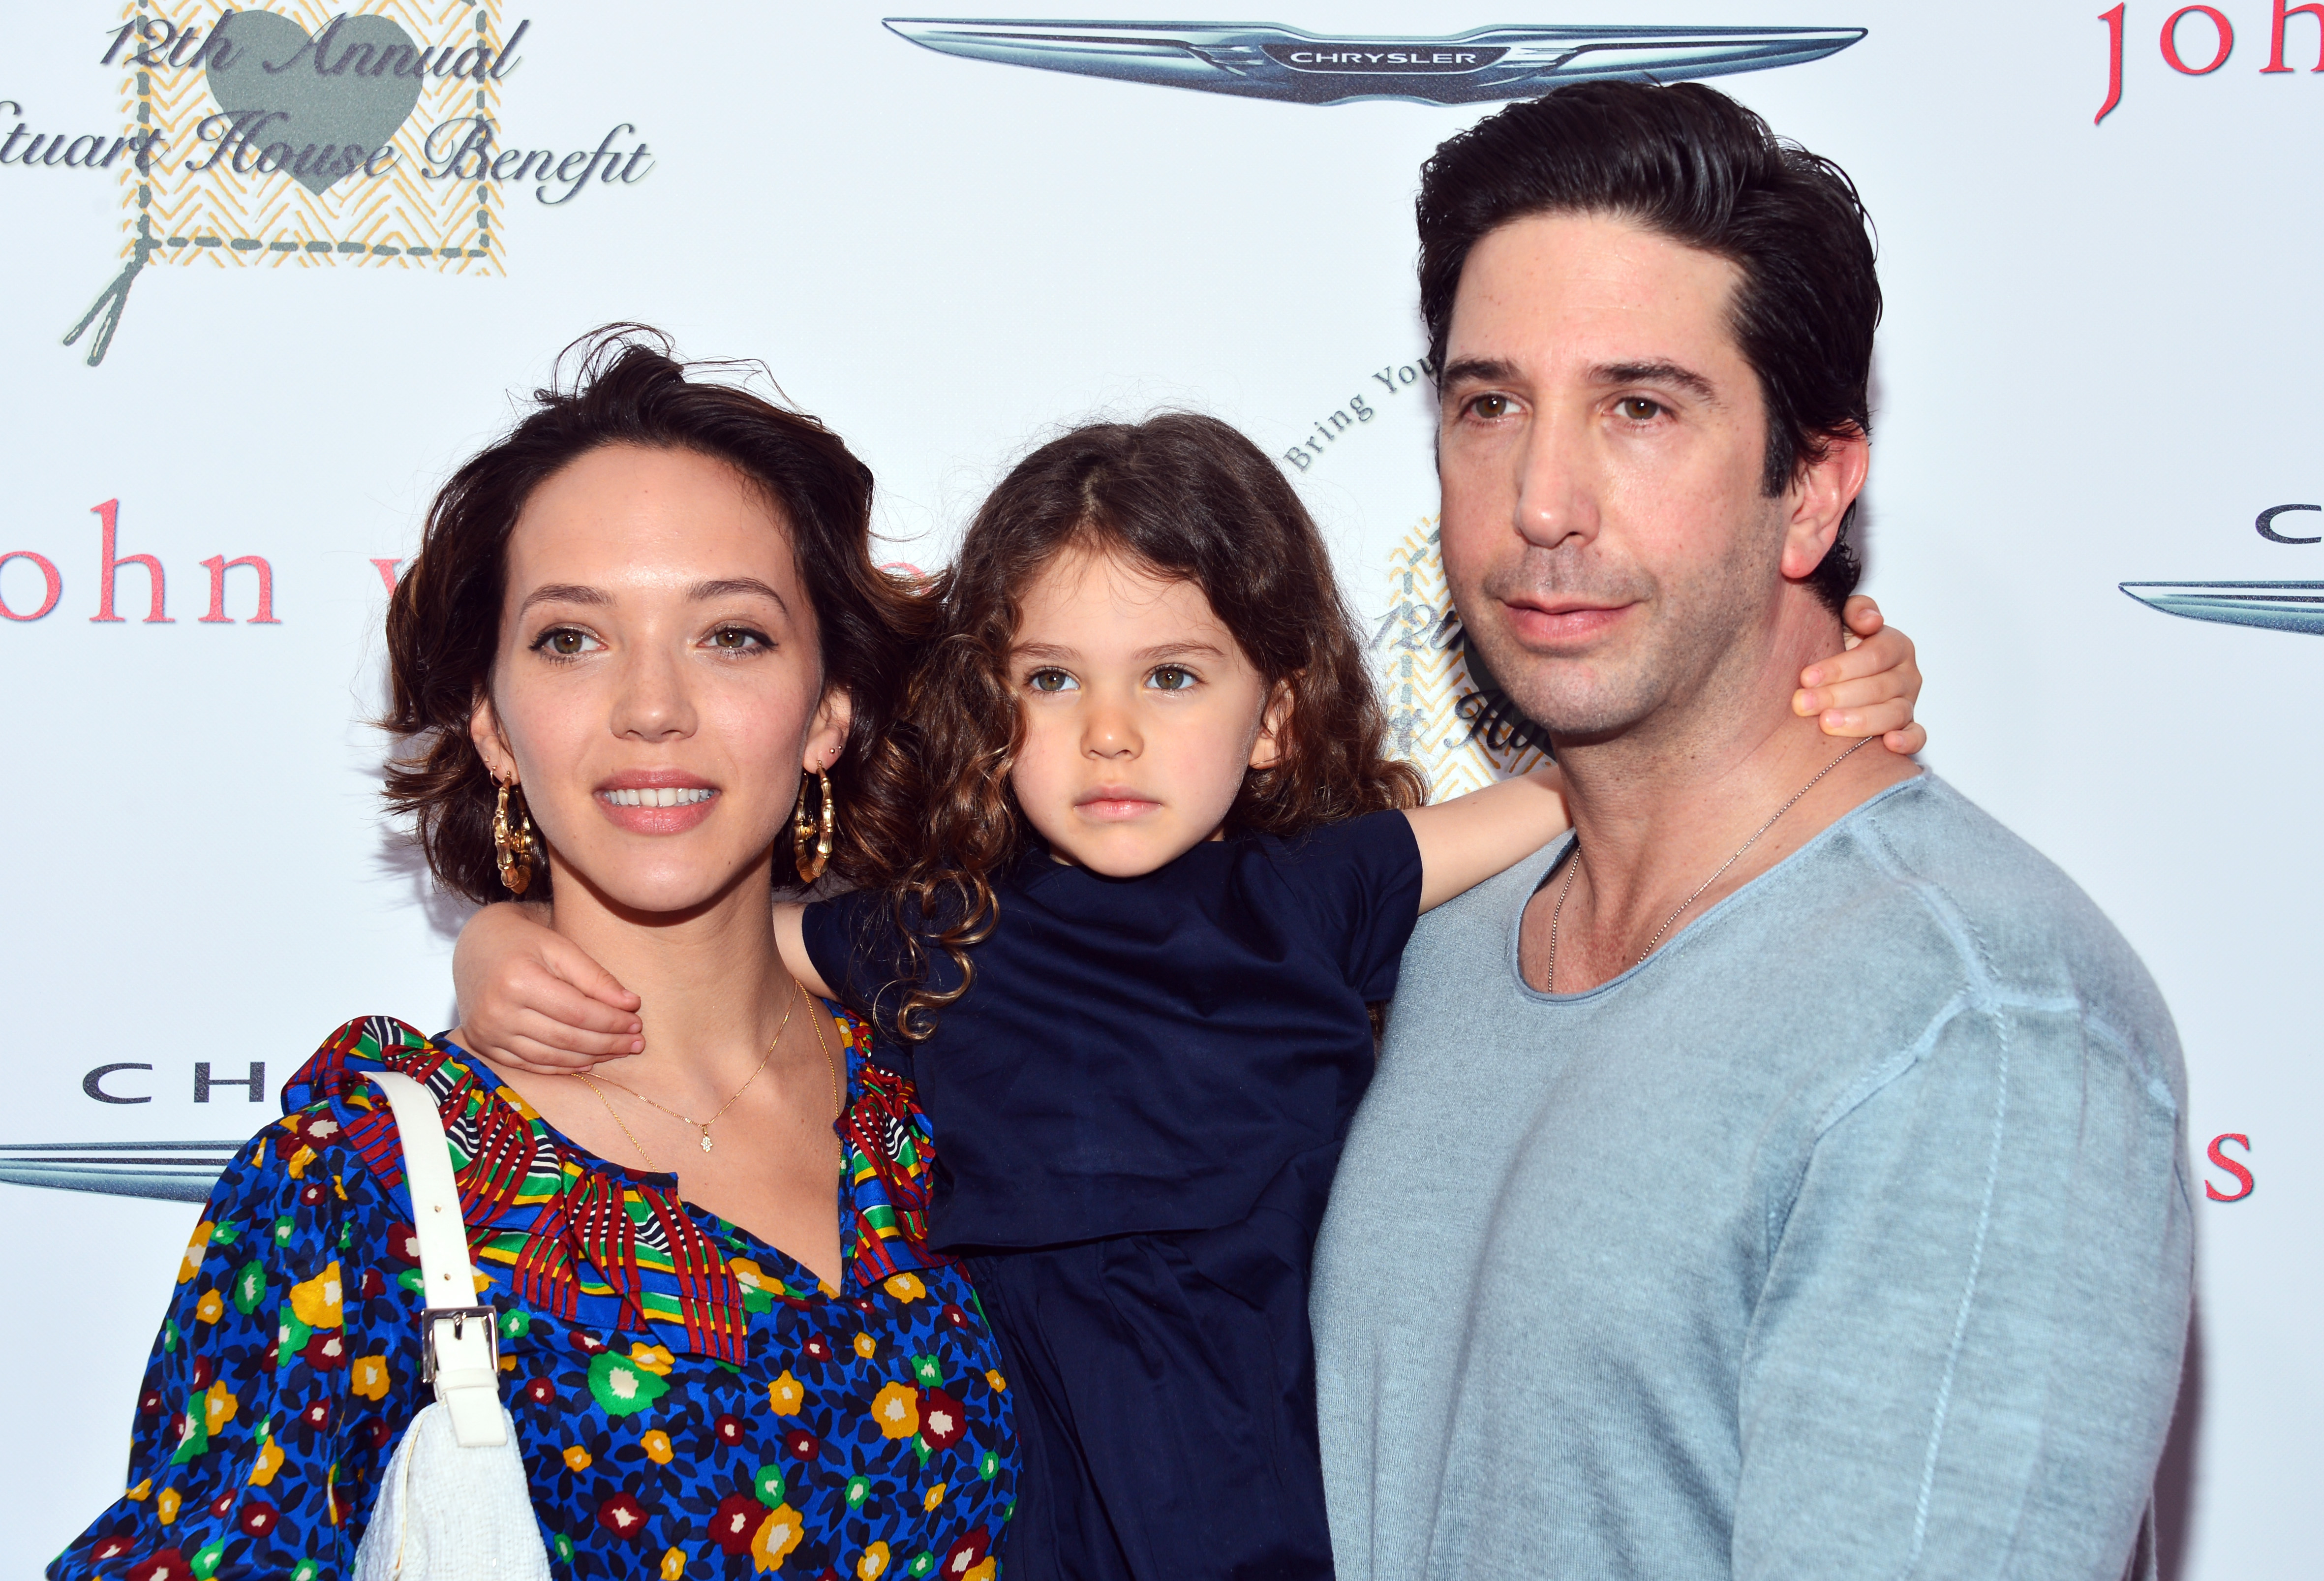 David Schwimmer, his wife Zoe Buckman and their daughter Cleo Buckman Schwimmer at the 12th Annual John Varvatos Stuart House Benefit in Los Angeles, California on April 26, 2015 | Source: Getty Images